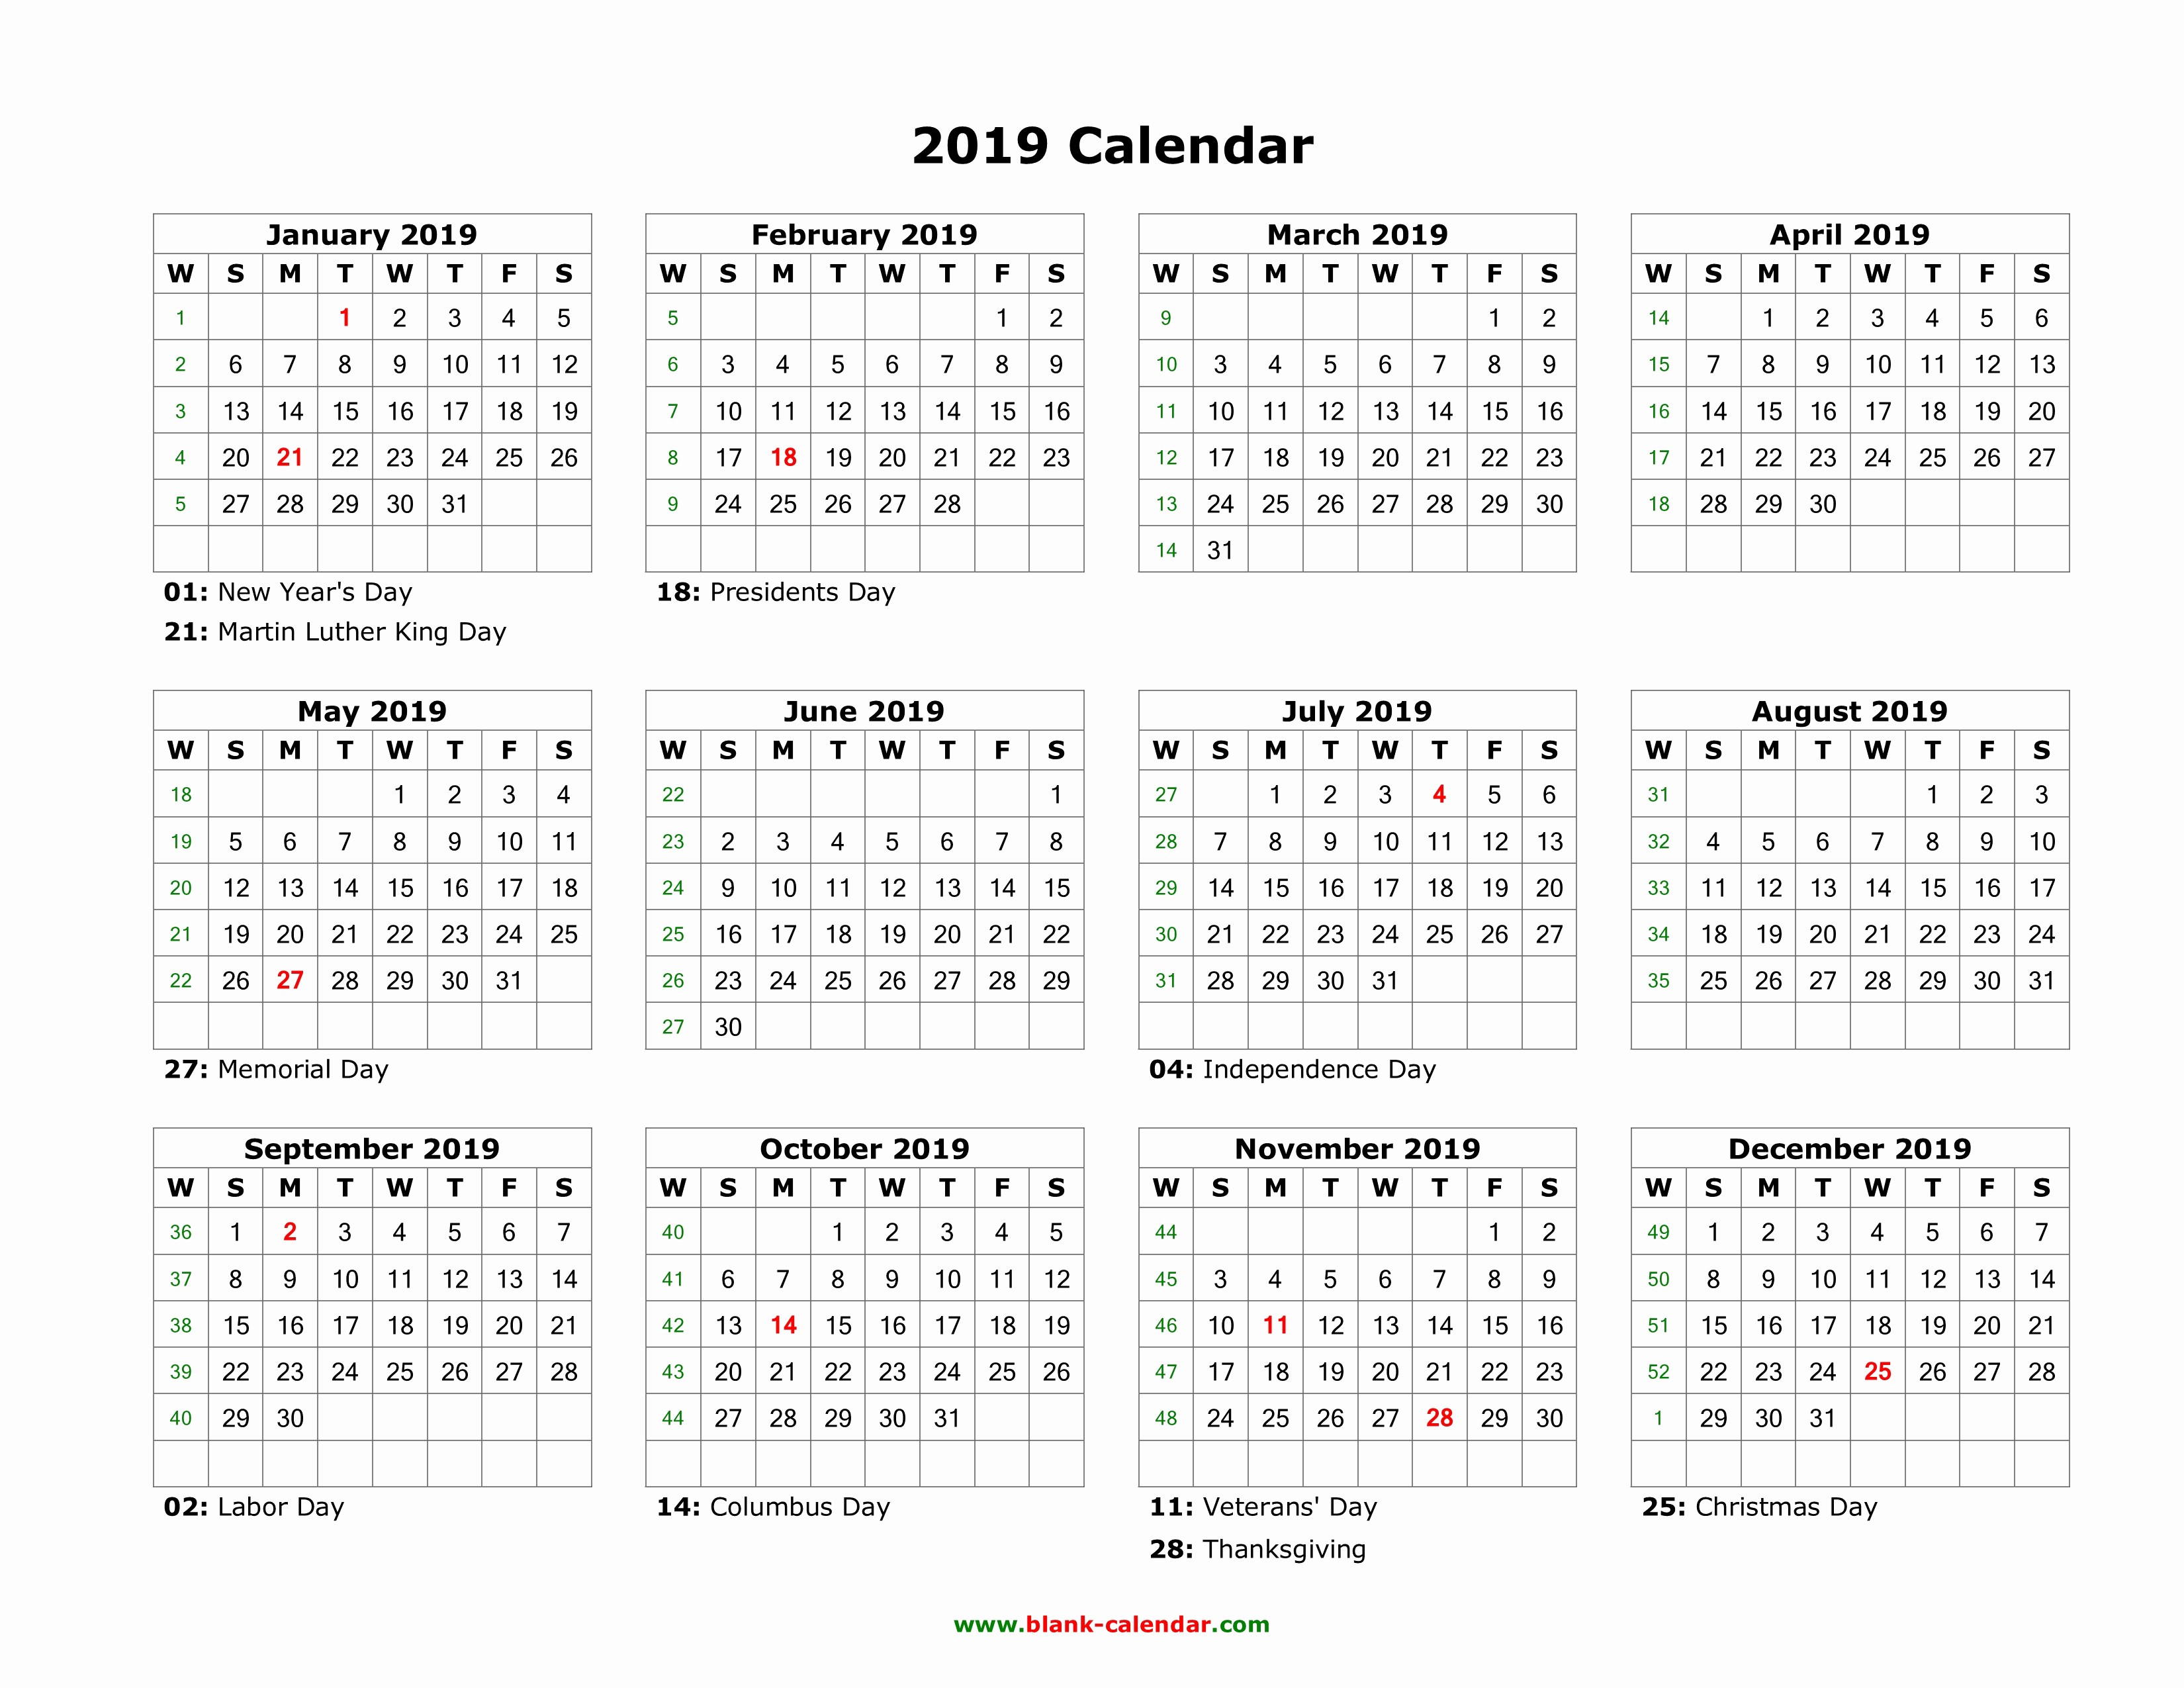 Free Printable 2019 Yearly Calendar New Download Blank Calendar 2019 with Us Holidays 12 Months